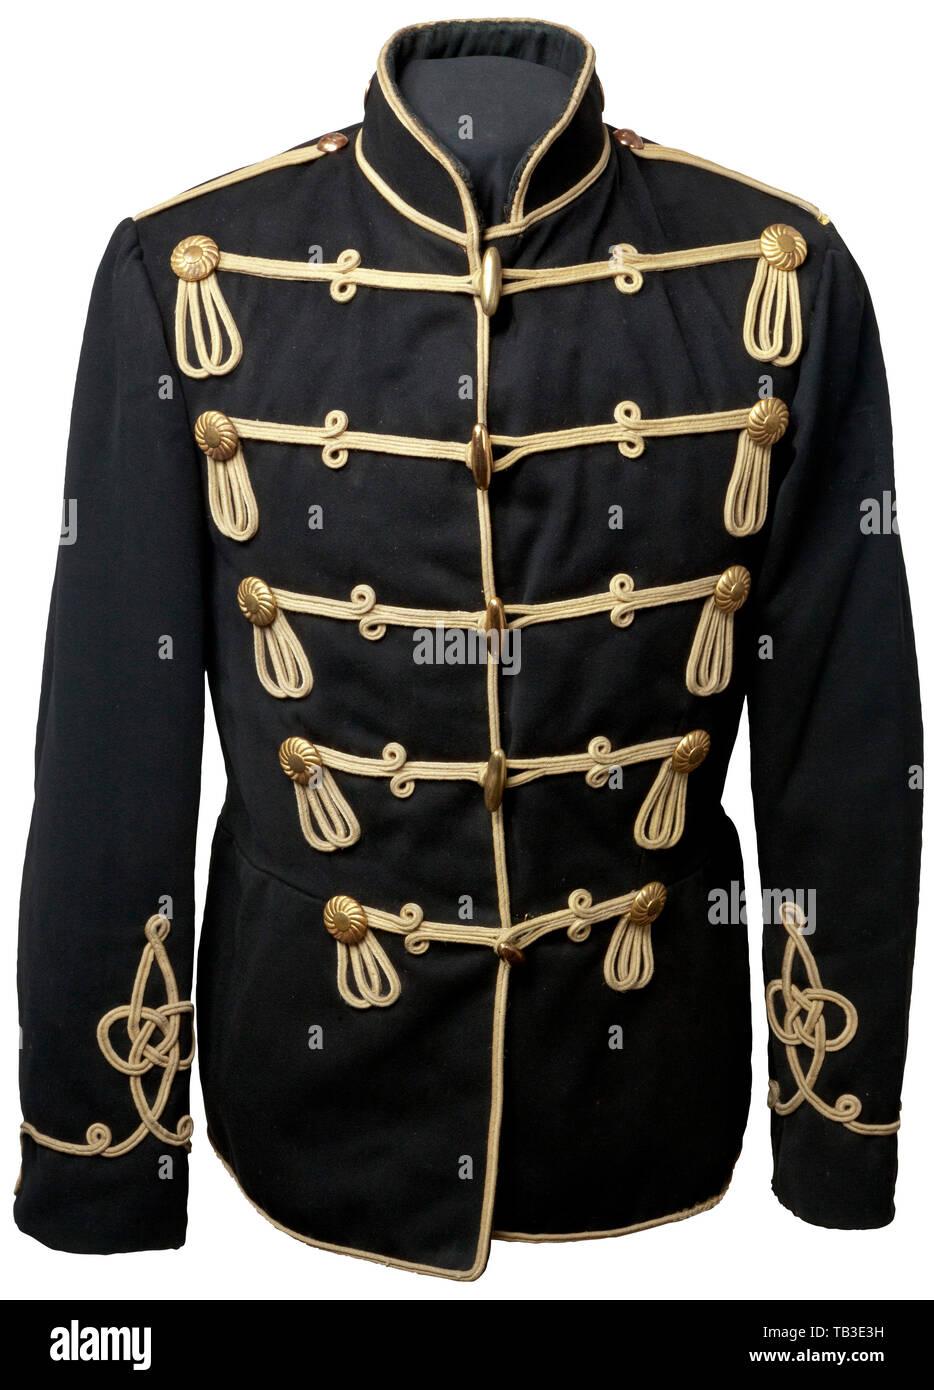 An Imperial German Attila for an Ober-Gefreiter of the Braunschweig Hussar Regt. no. 17, X AK, Tunic of black cotton material with yellow piping, piping in bottom left front edge has some fraying. Yellow cord cuff and chest braid, yellow sewn-in shoulder boards with gold 2nd squadron buttons, gold rosette and toggle buttons, gold Prussian Gefreiter collar buttons, black silk lining with some wear areas, label in lining with Gefreiter Kalbreier owner's name, small repair on shoulder. USA-lot. Braunschweig, Brunswick, German, Germany, Northern Germ, Additional-Rights-Clearance-Info-Not-Available Stock Photo